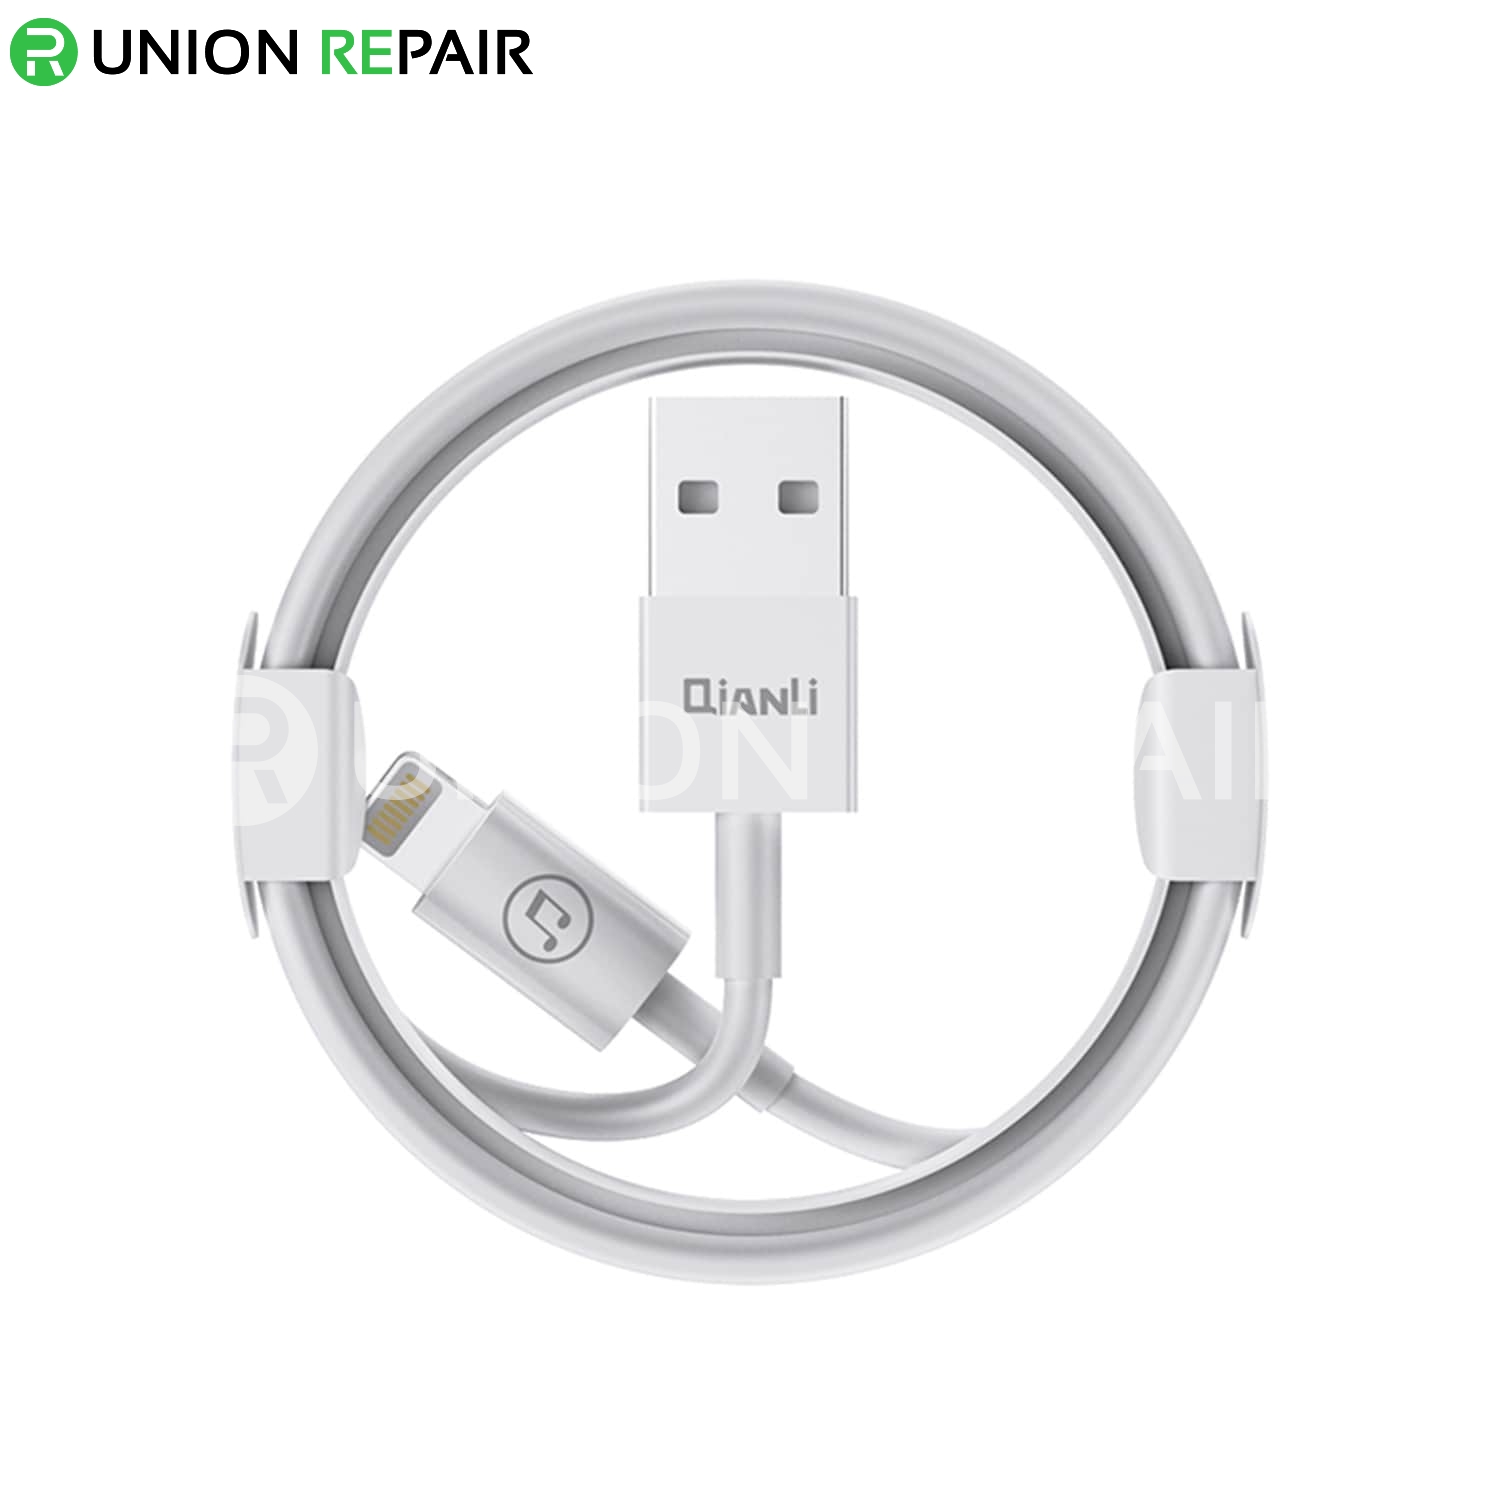 Qianli Automatic Restoration DFU Recovery Cable